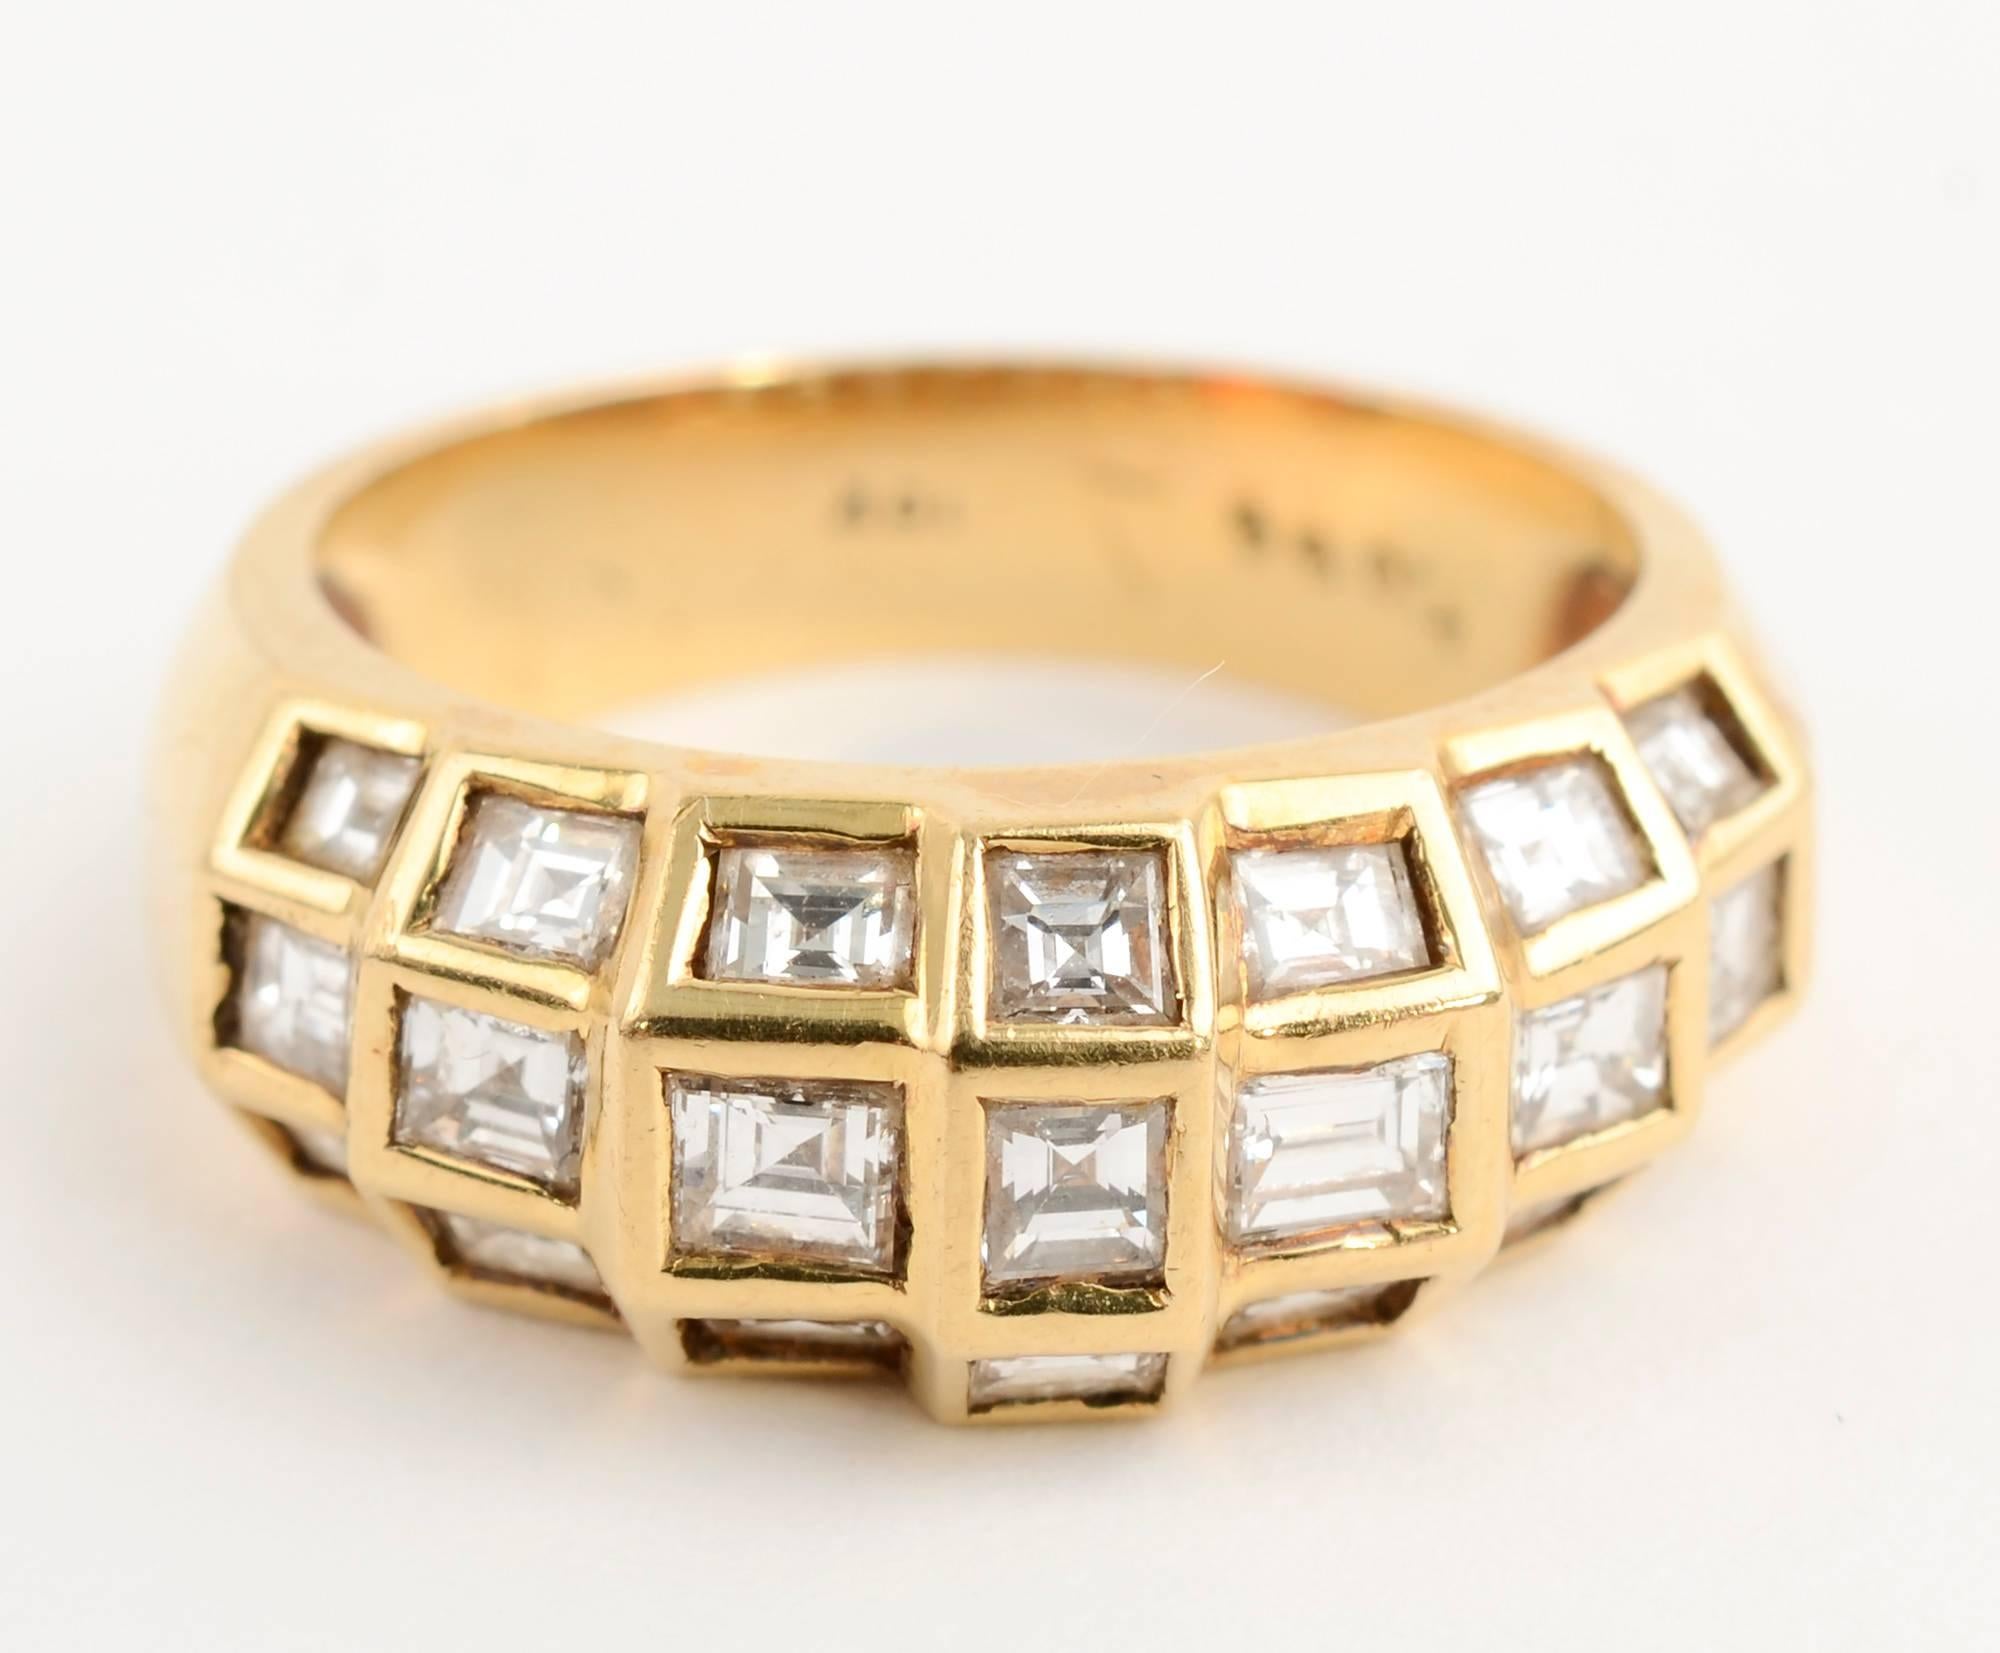 Domed ring set with 21 square and rectangular diamonds weighing approximately 1 carat. The diamonds are set in square stepped jackets giving a nice dimensionality to the ring. It is size 6 and can easily be adapted larger or smaller.